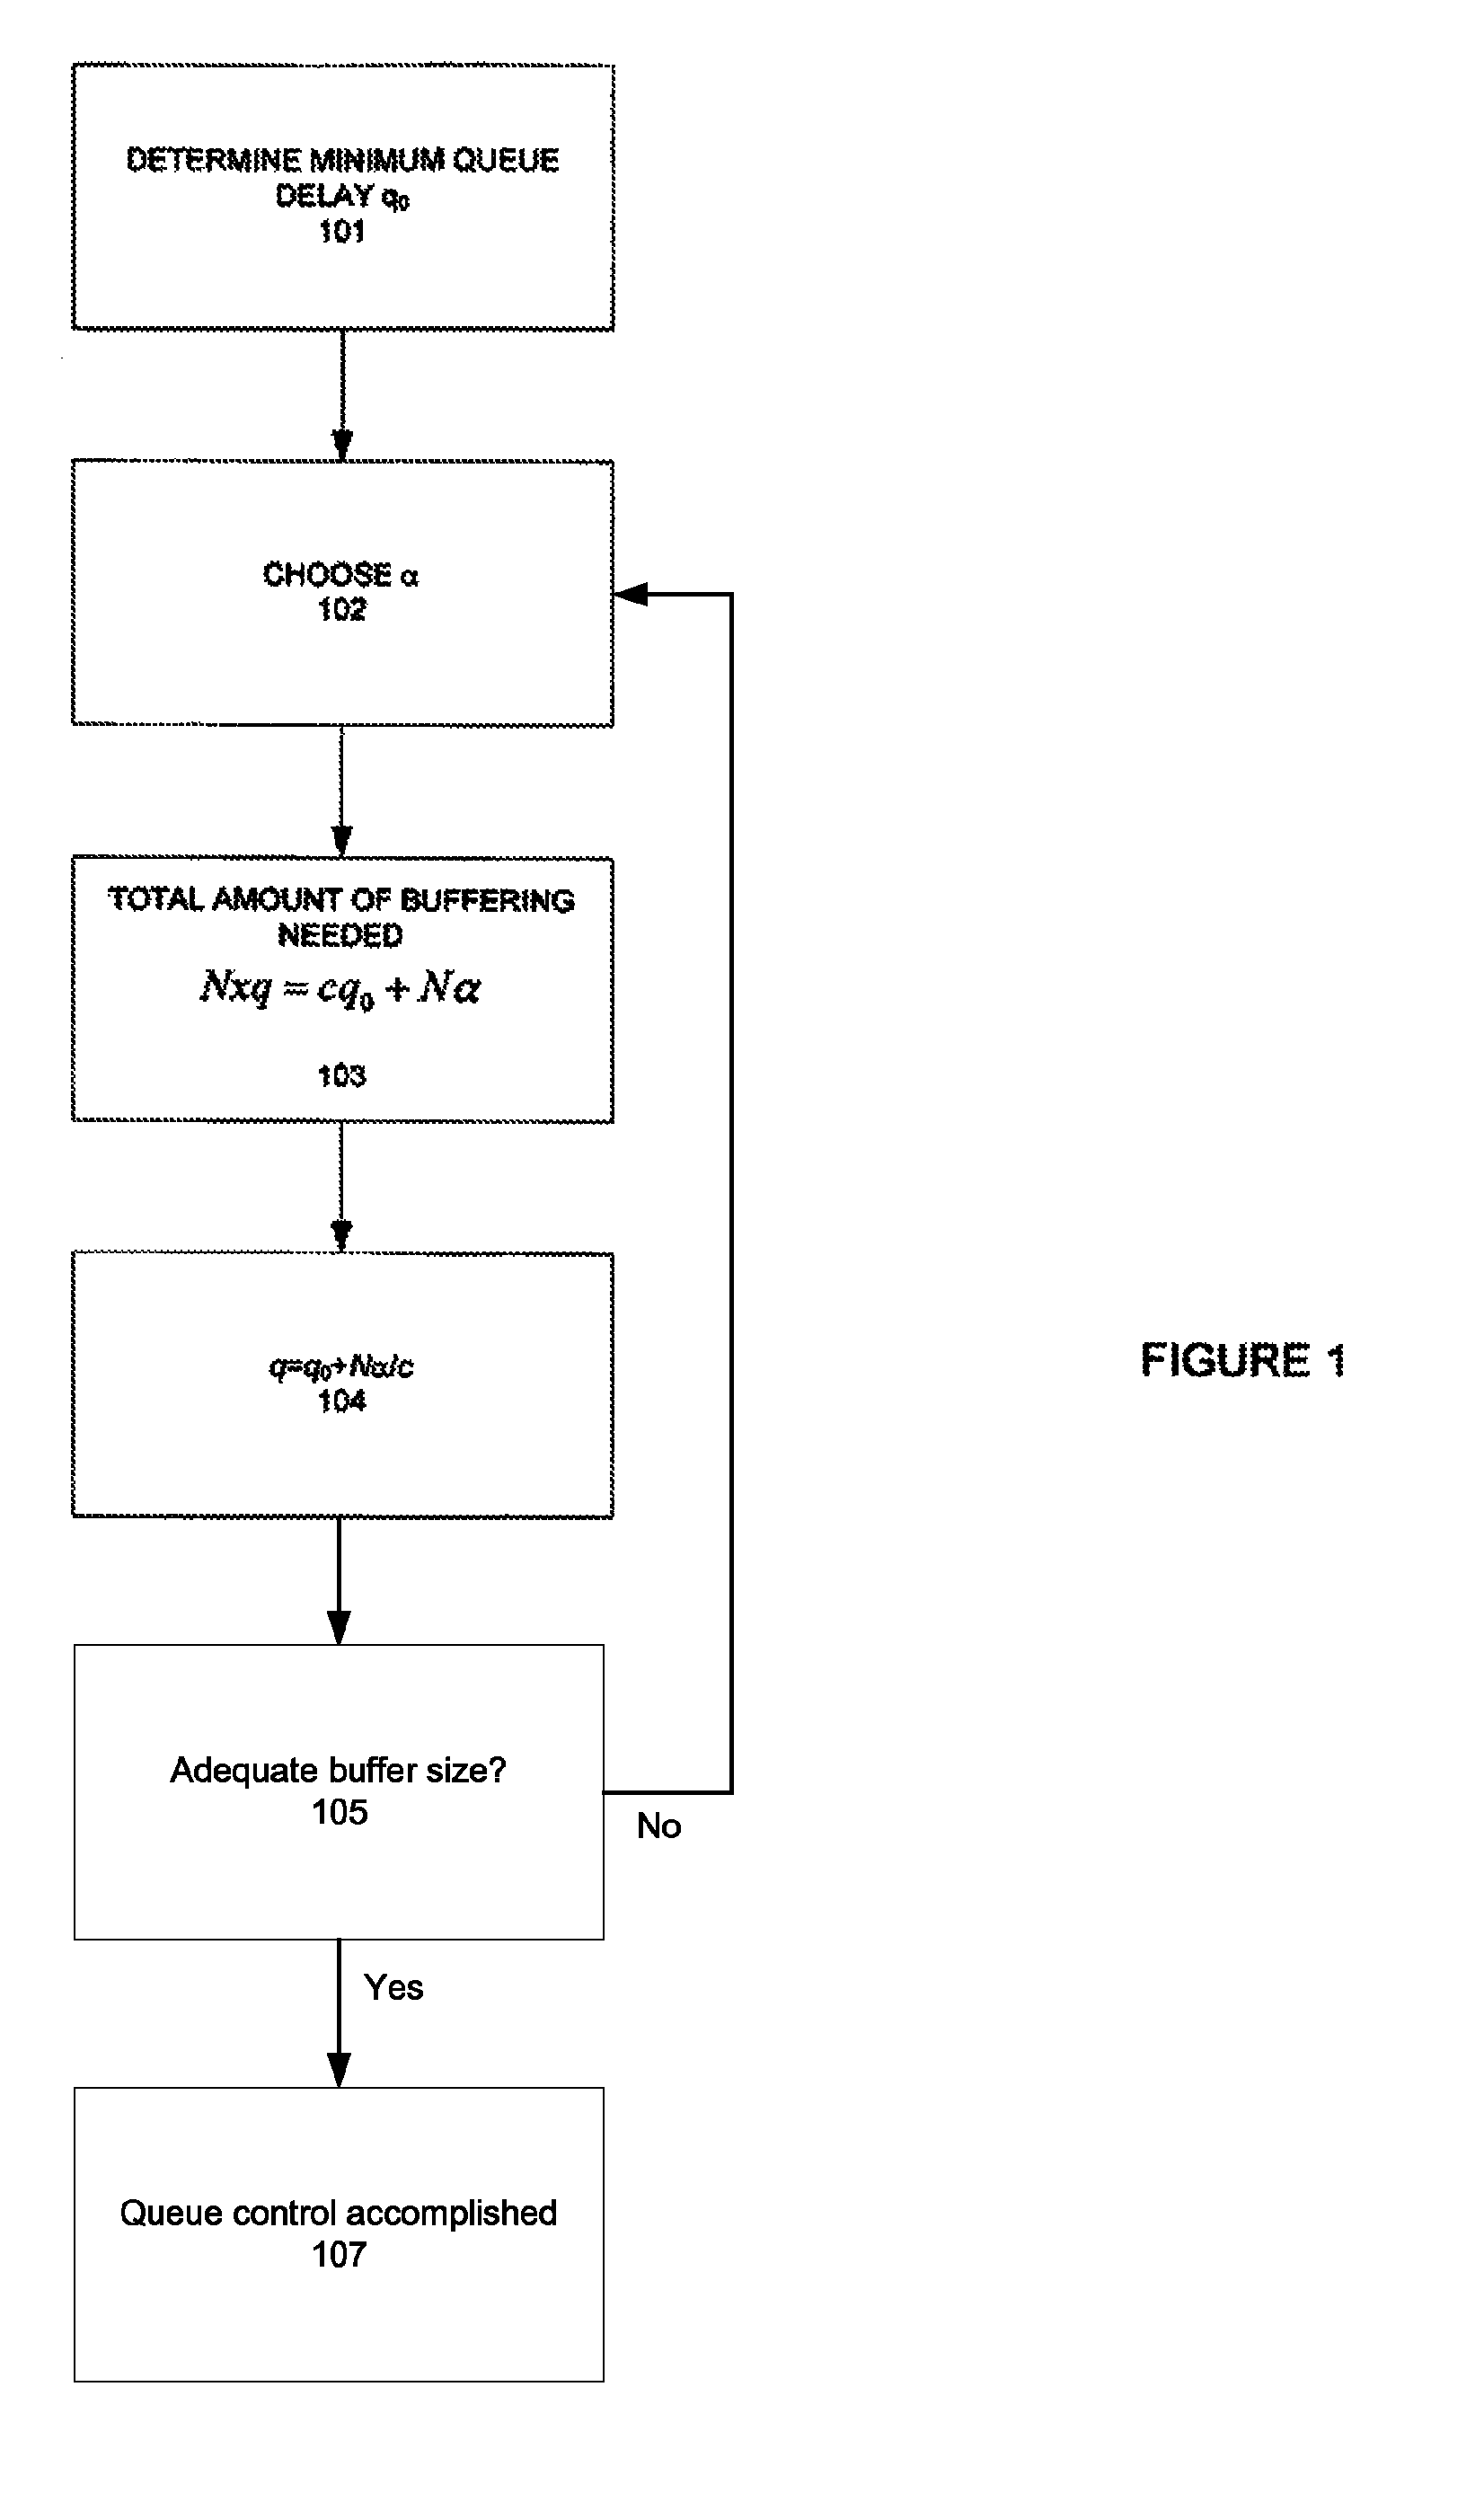 Method and apparatus for network congestion control using queue control and one-way delay measurements